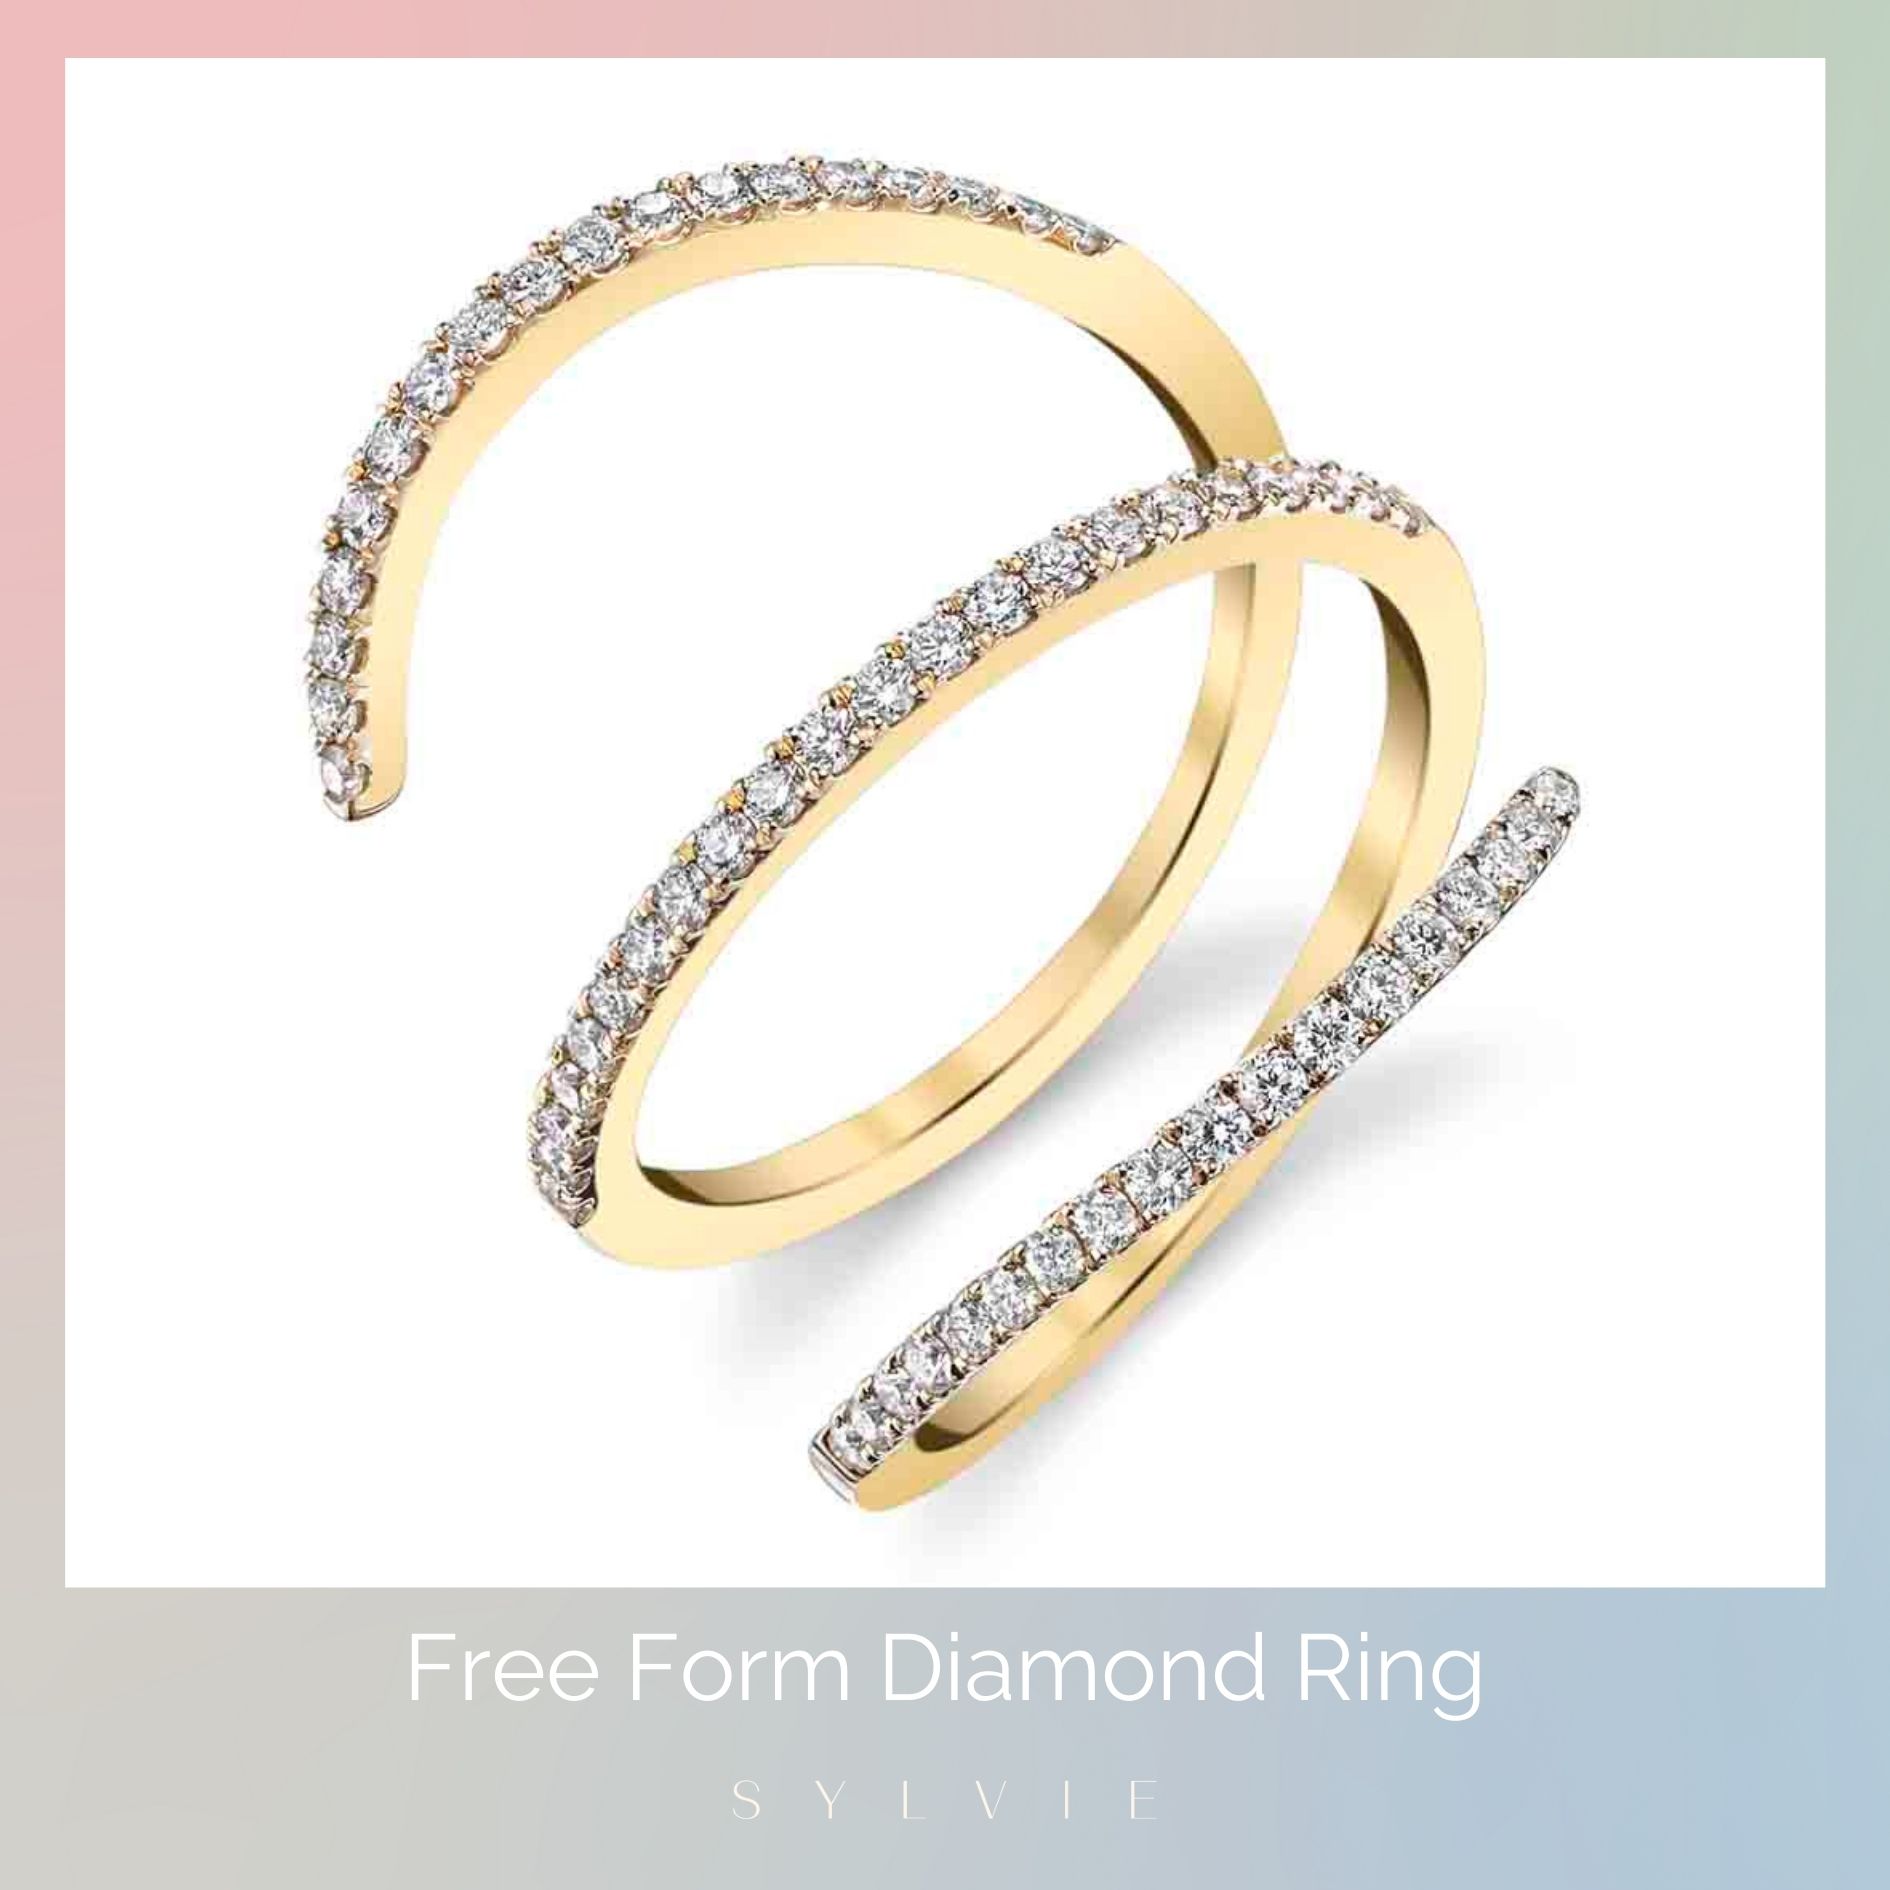 mother's day gift guide free form diamond ring